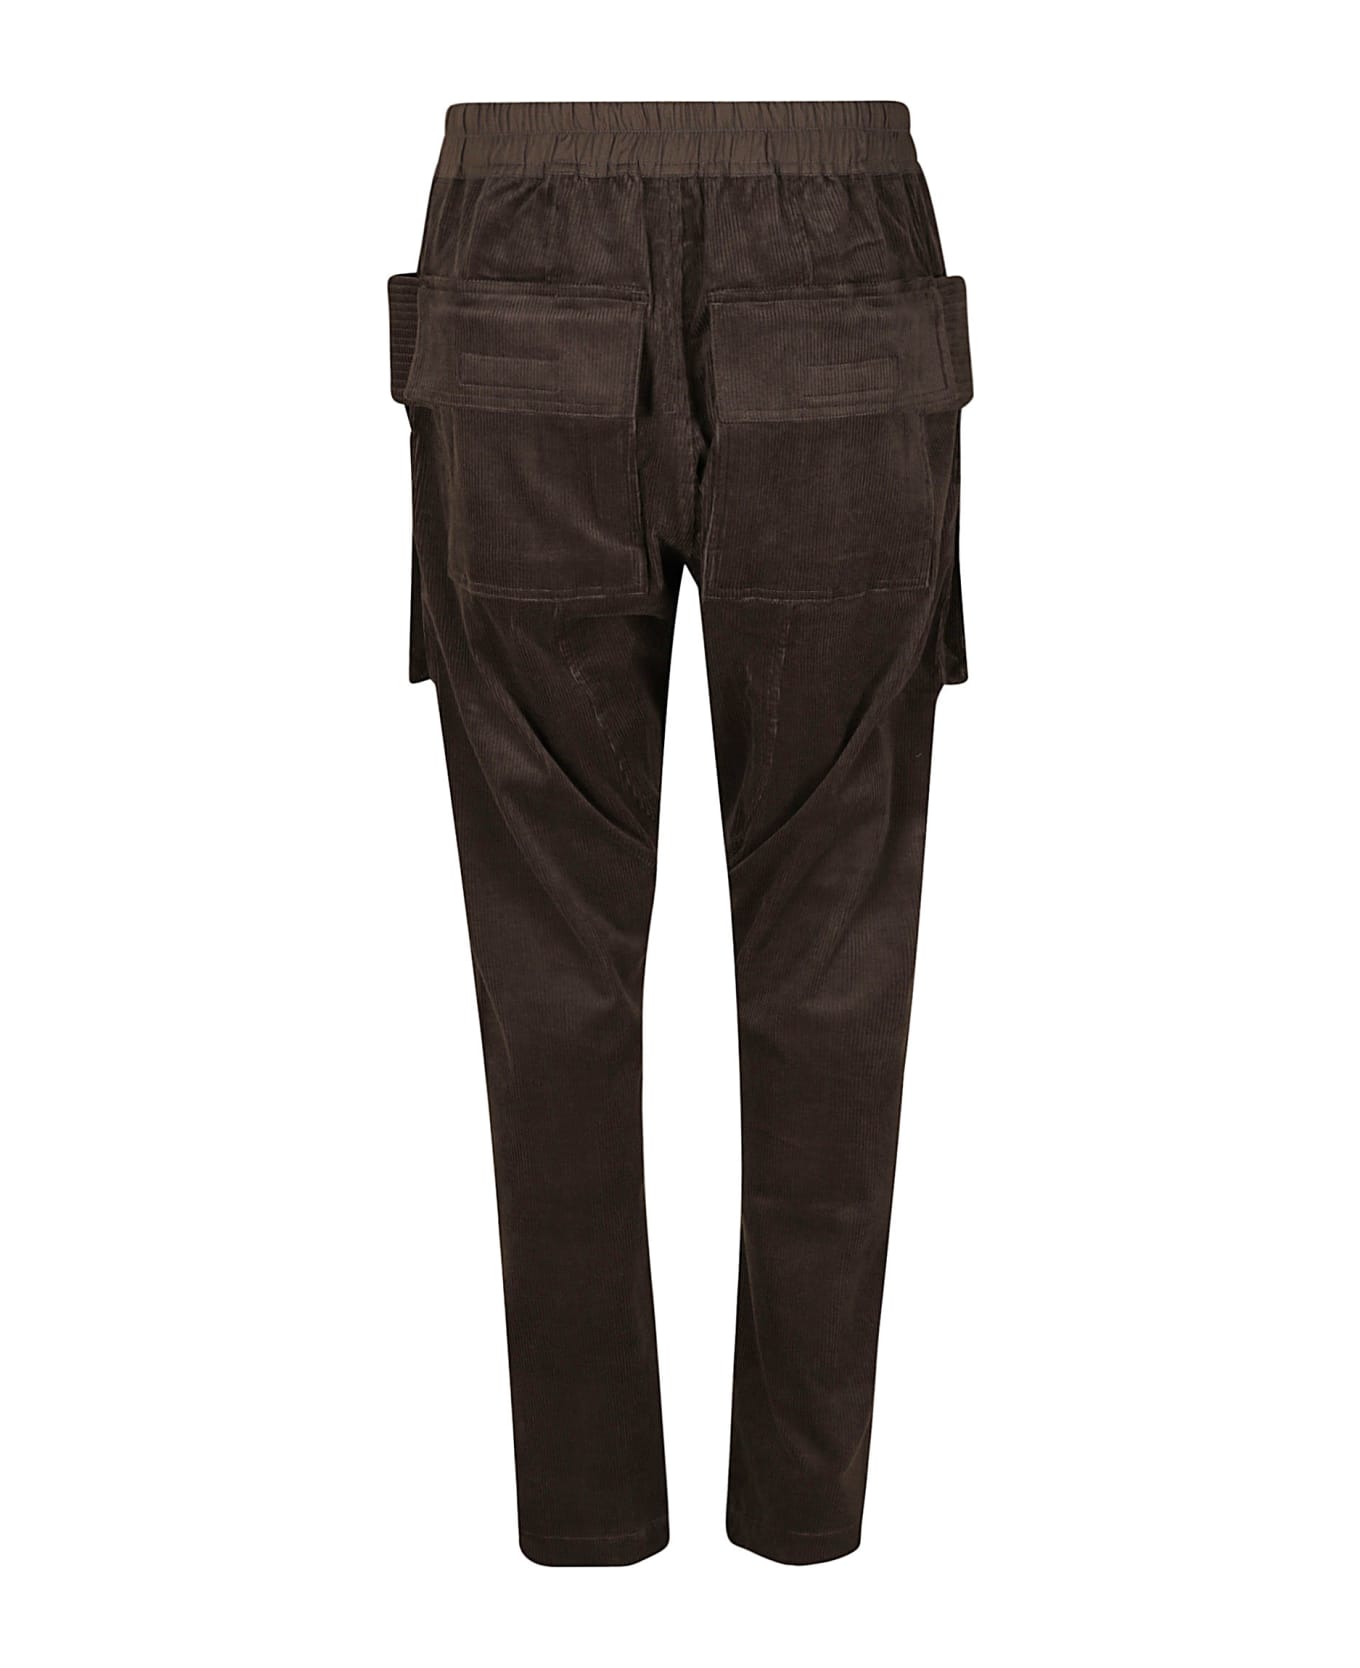 Rick Owens Tapered Corduroy Trousers - Polvere